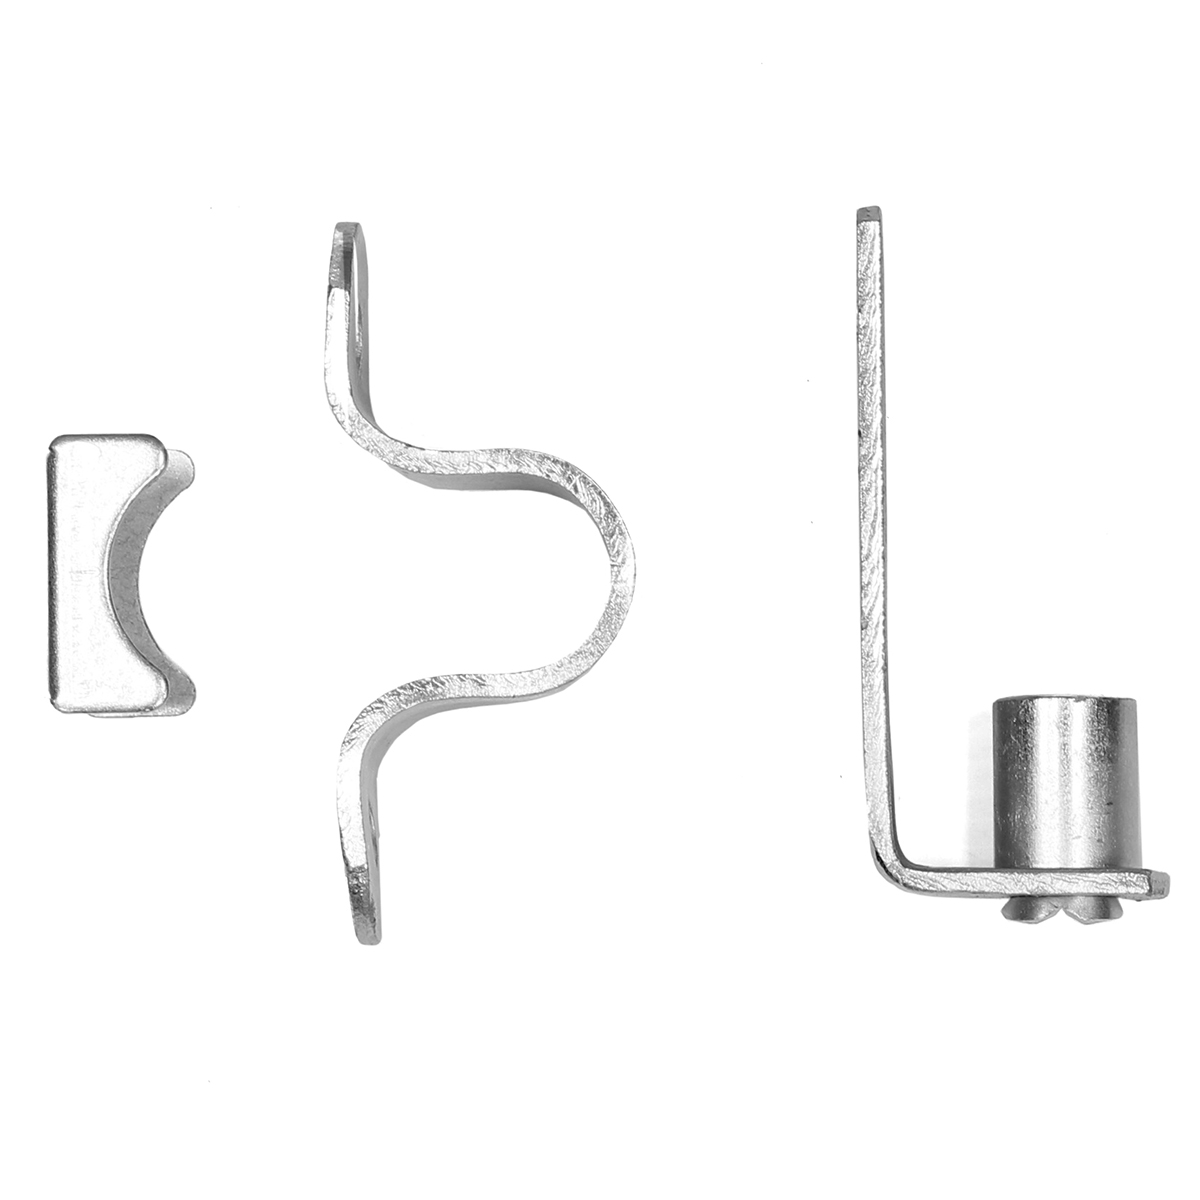 13795 - Strap and Hinge Set - components